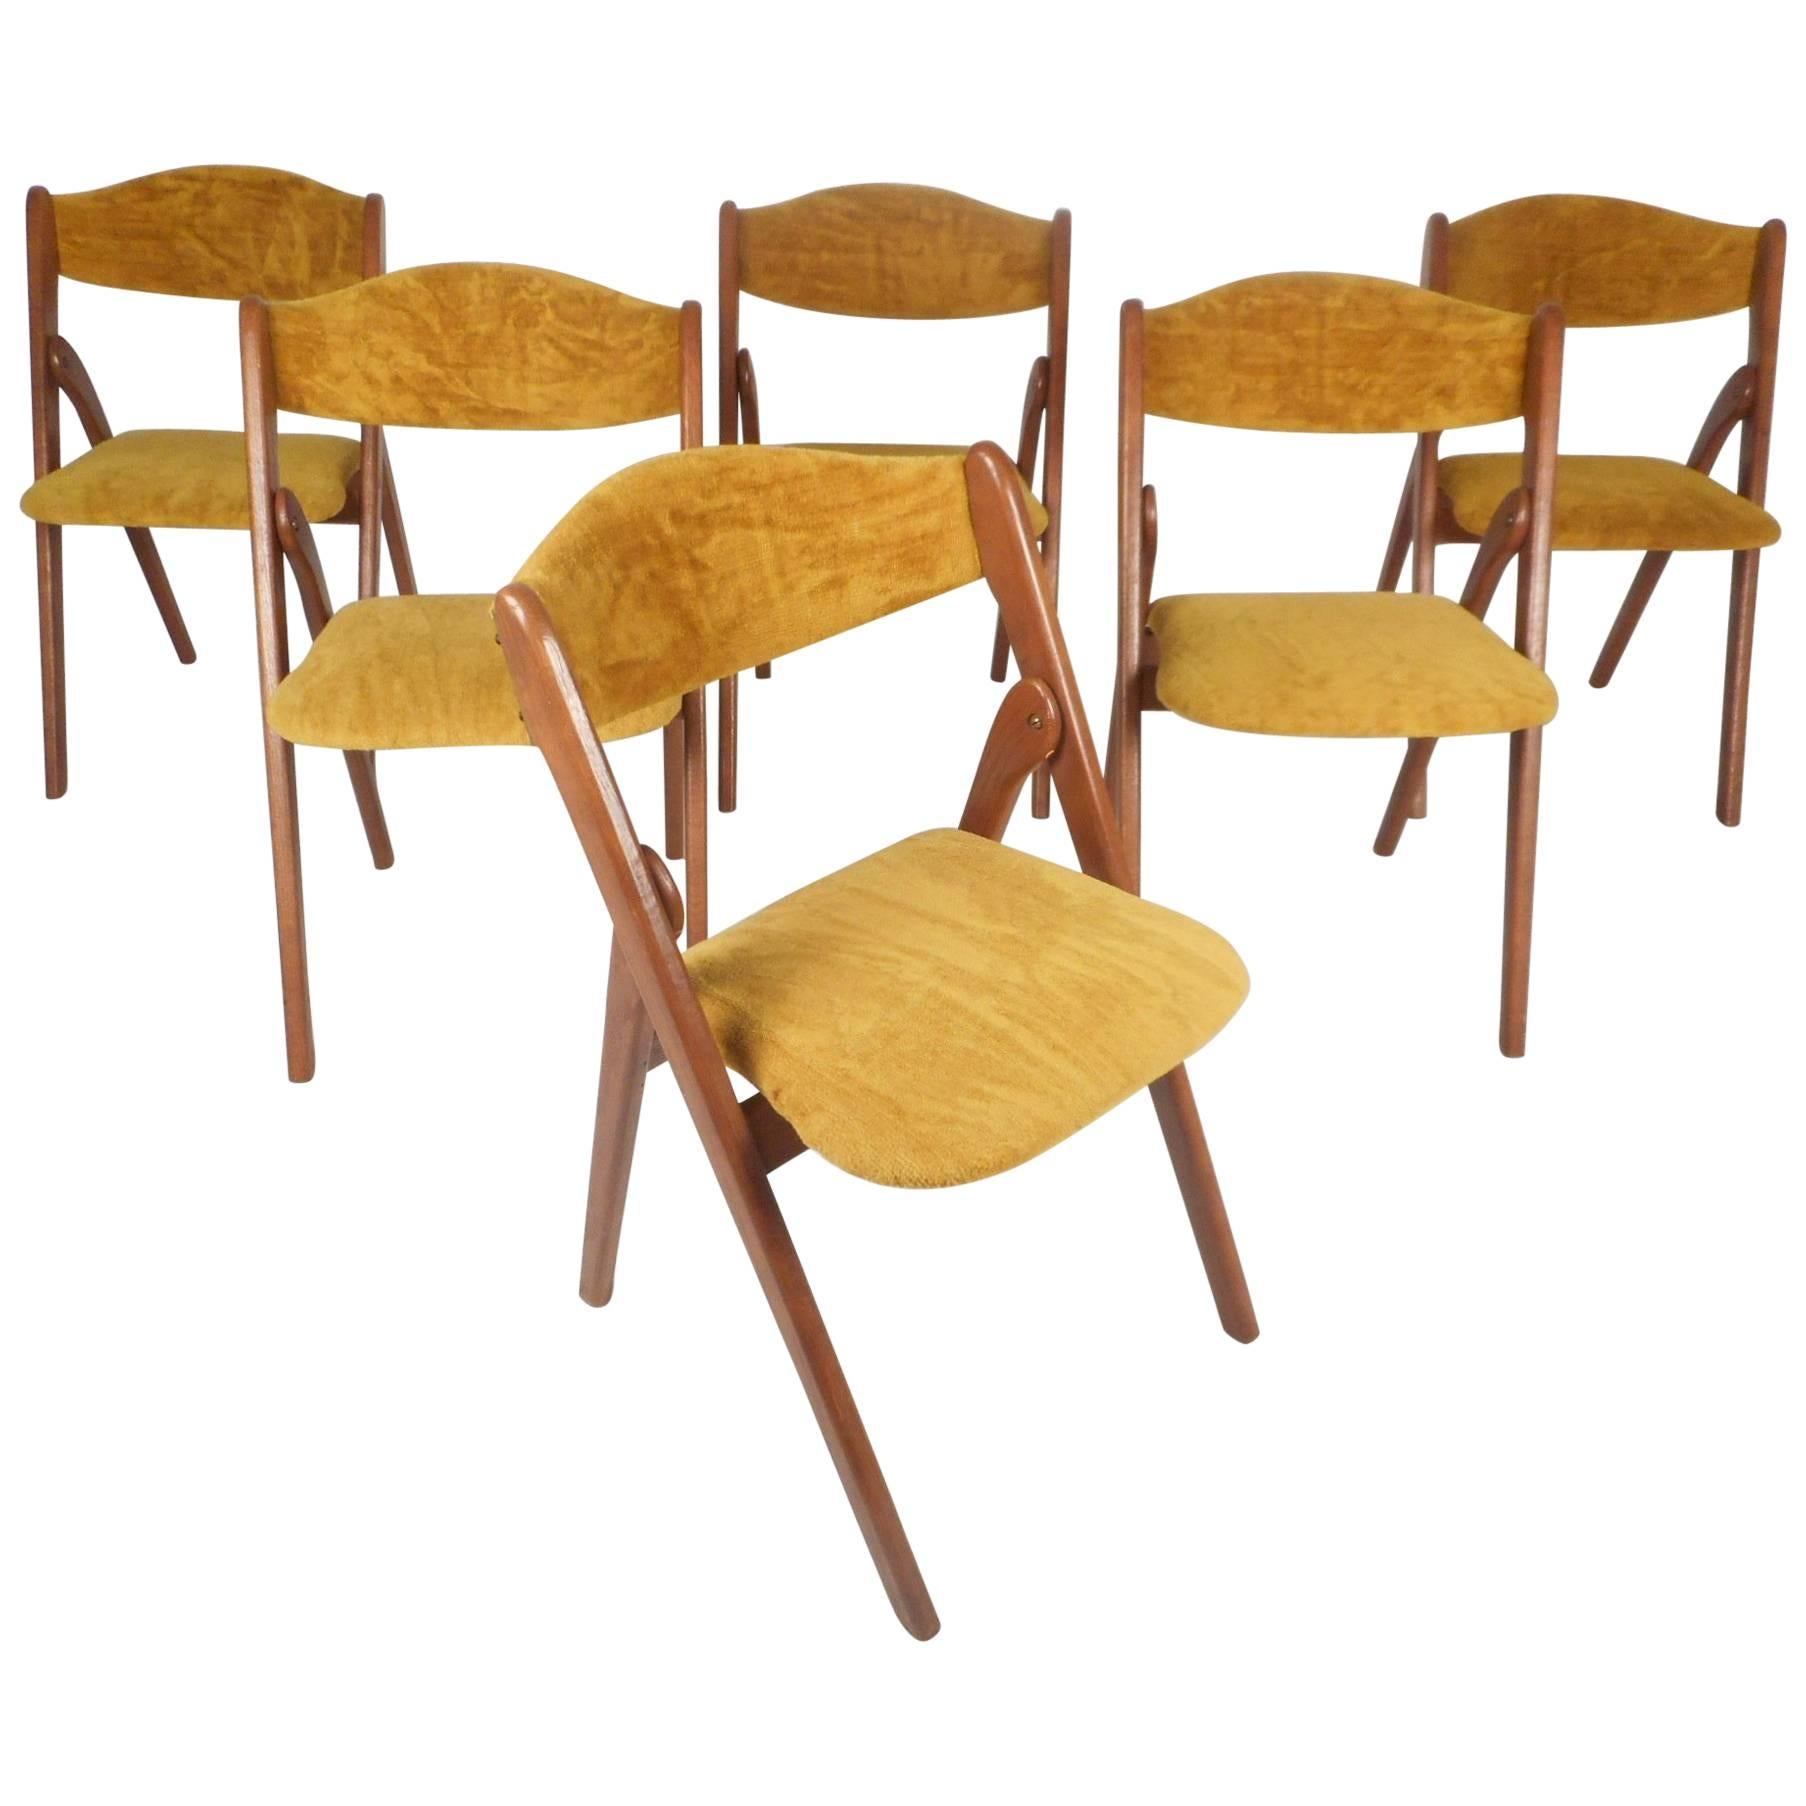 Set of Six Mid-Century Modern Teak Collapsible Dining Chairs